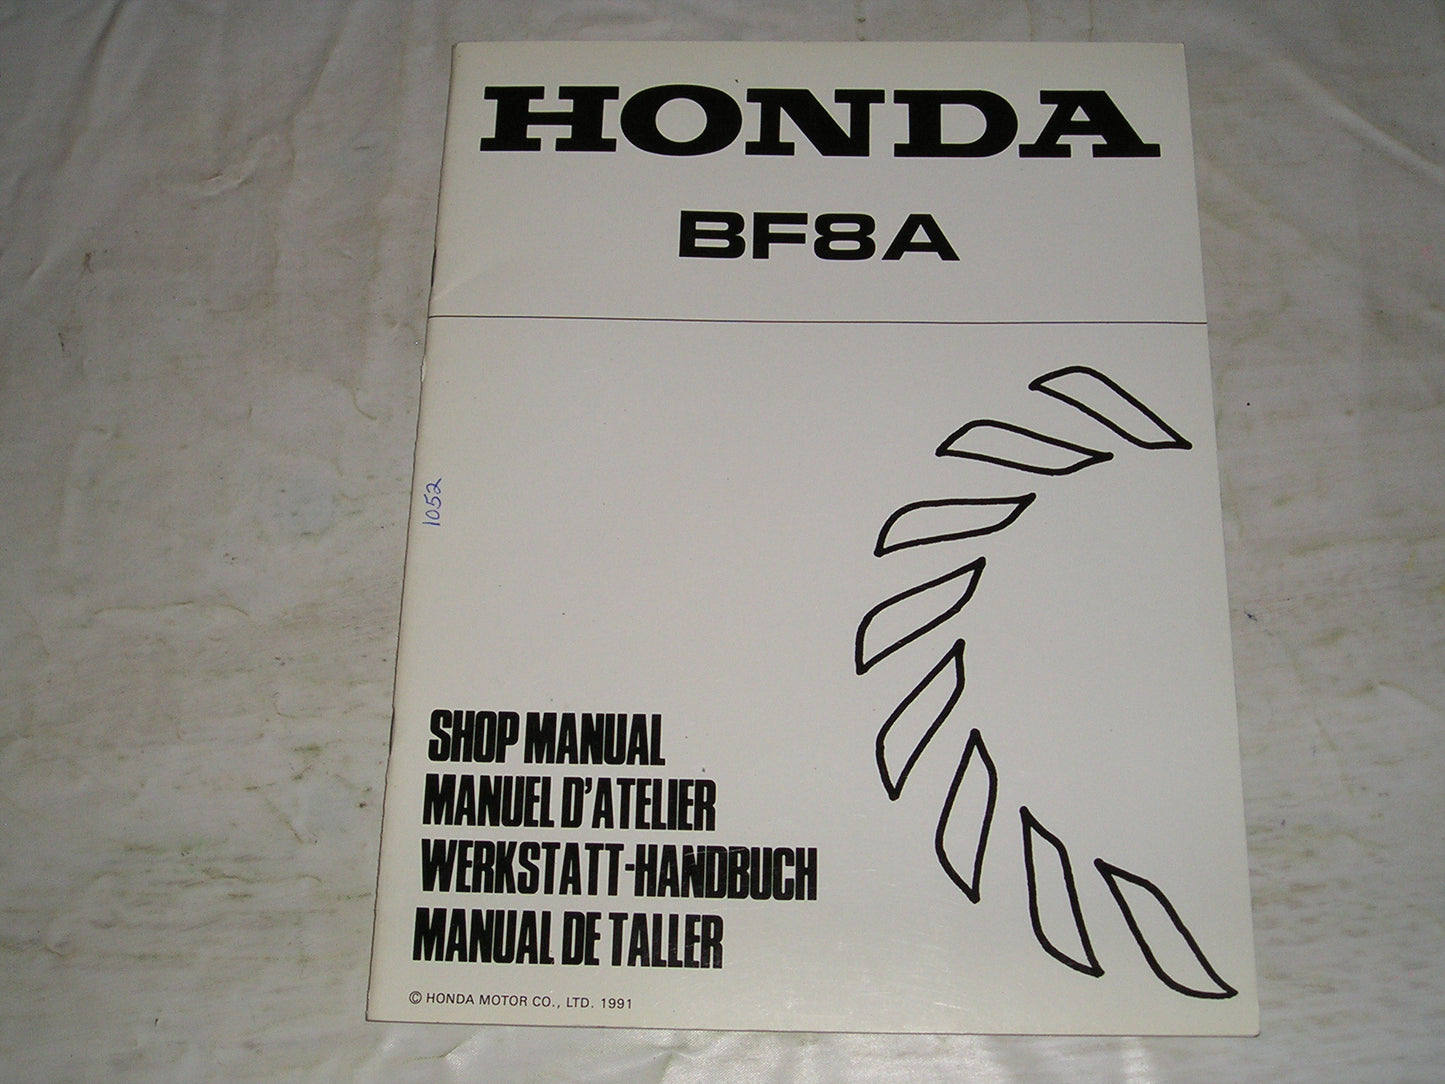 HONDA BF3A 1991 Outboard Motor Service Manual Supplement  6688122Z   #1052